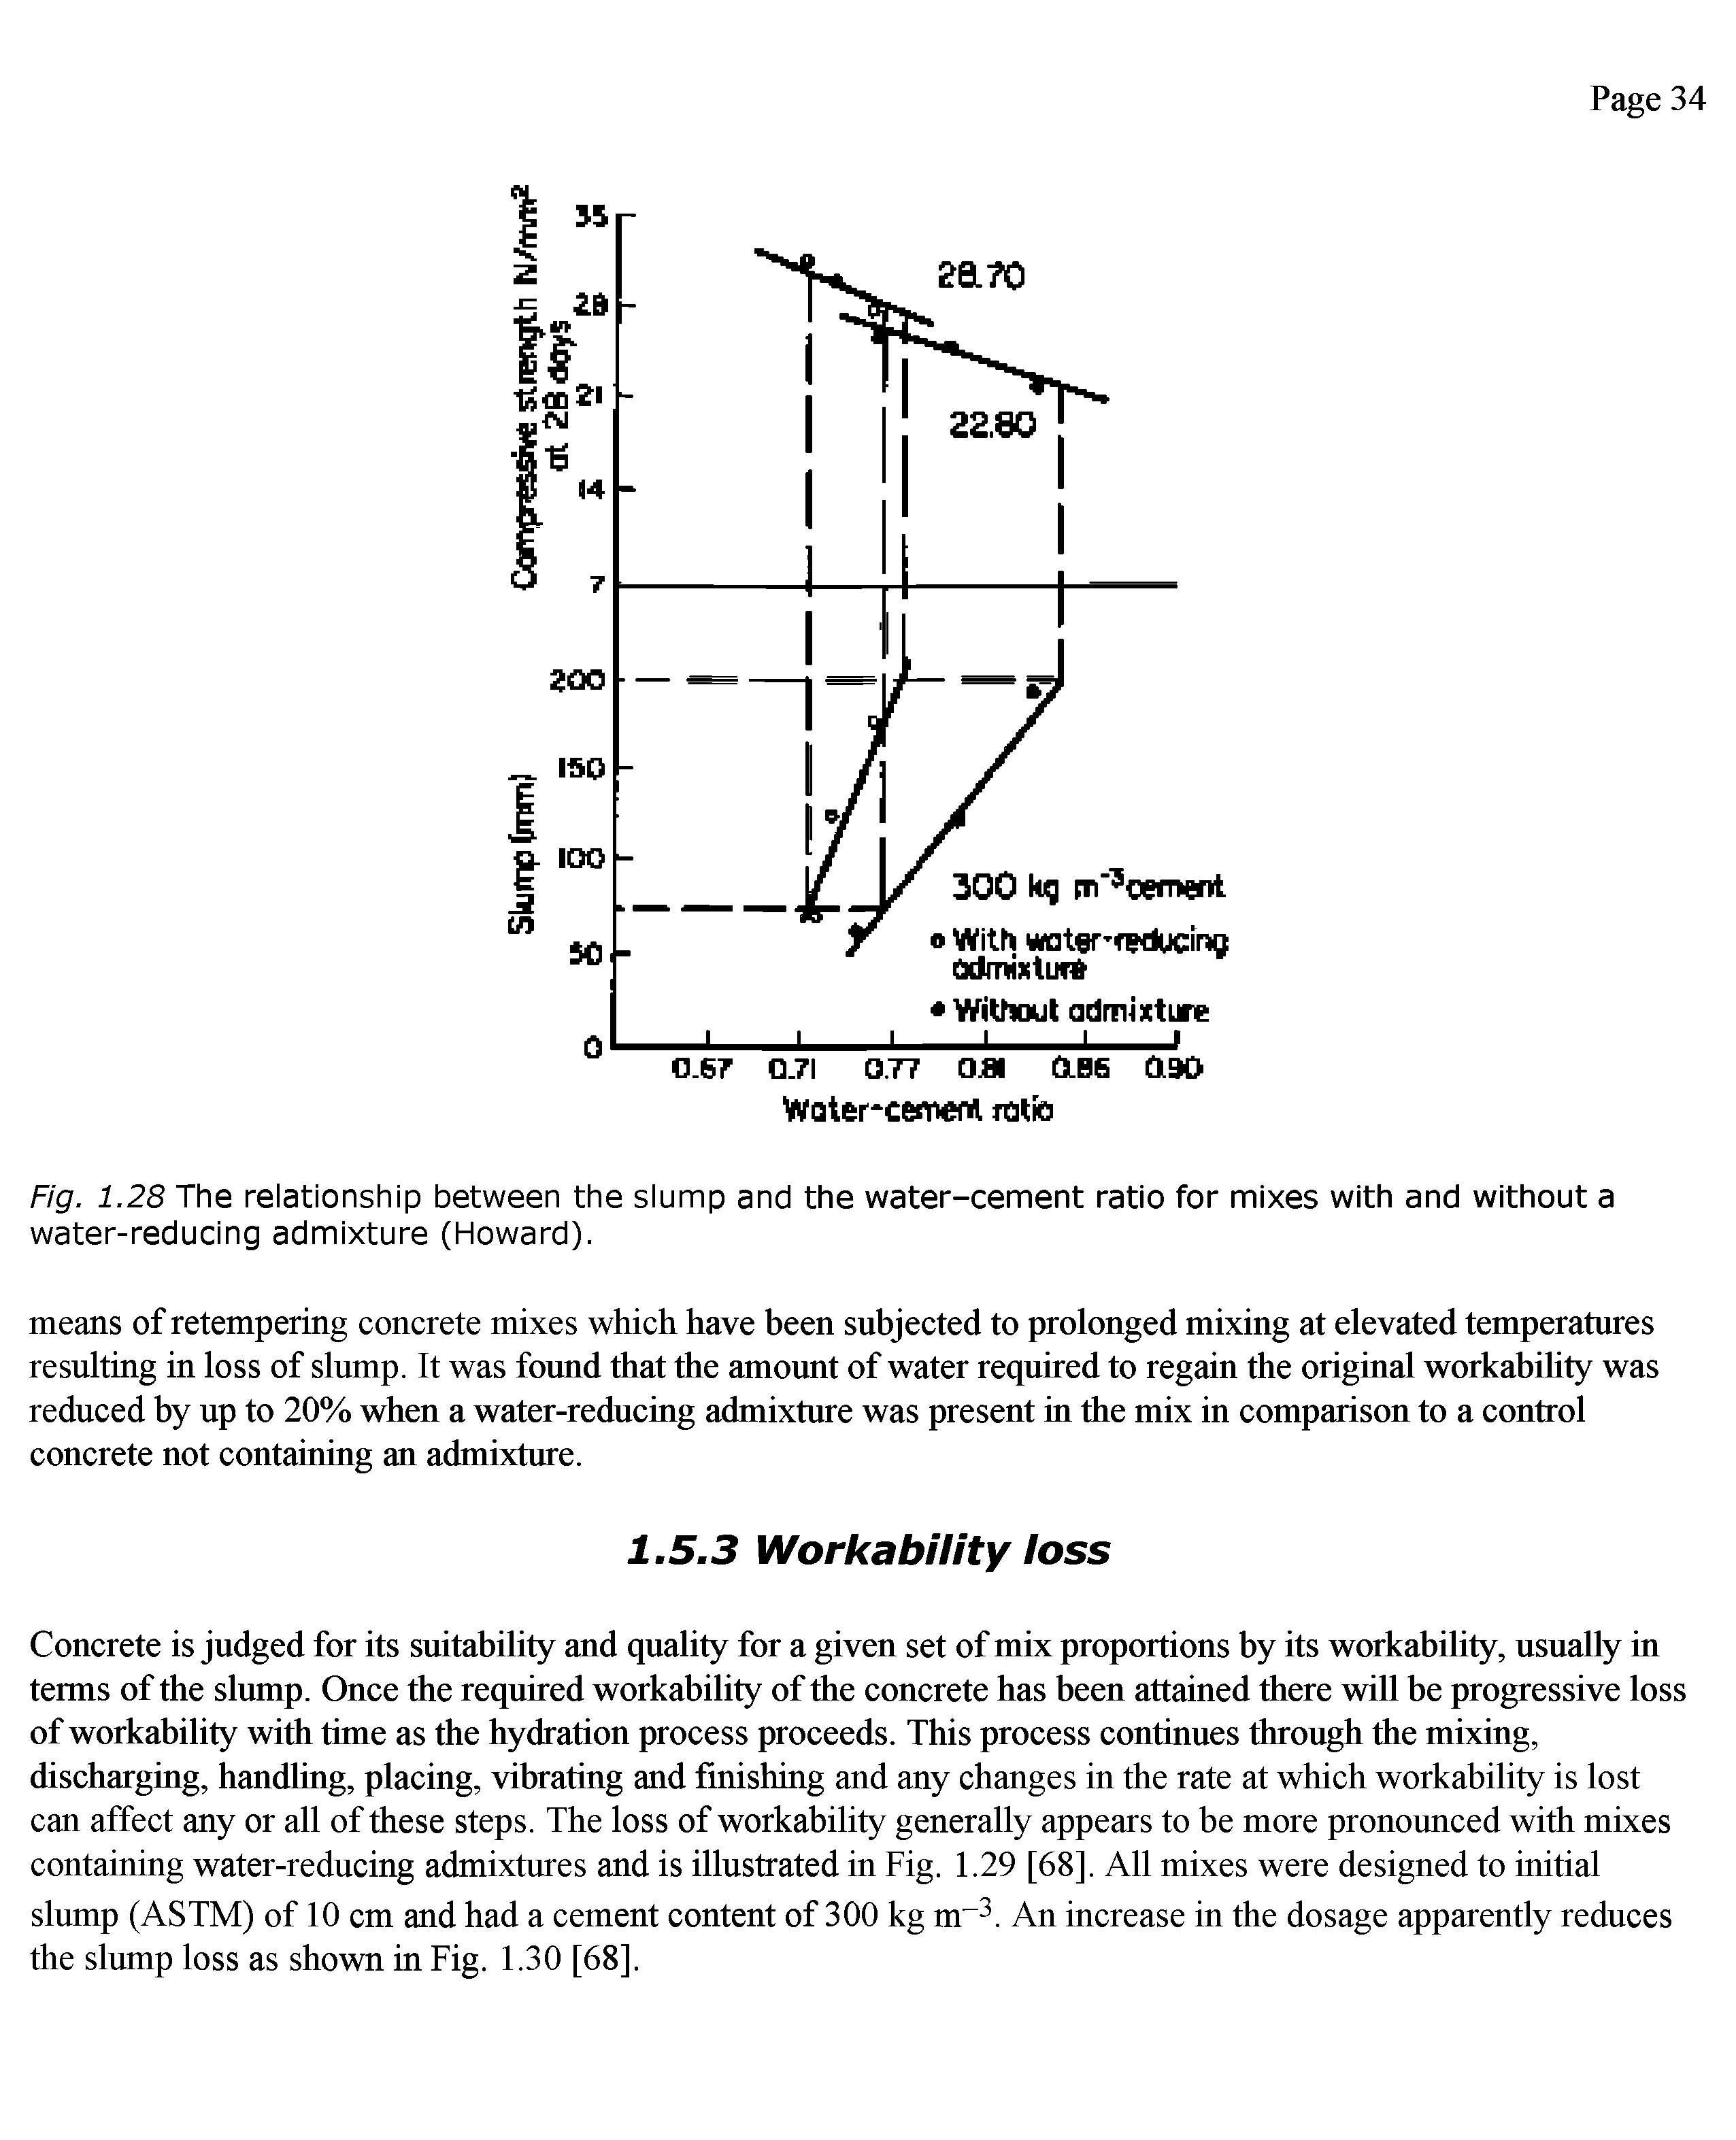 Fig. 1.28 The relationship between the slump and the water-cement ratio for mixes with and without a water-reducing admixture (Howard).